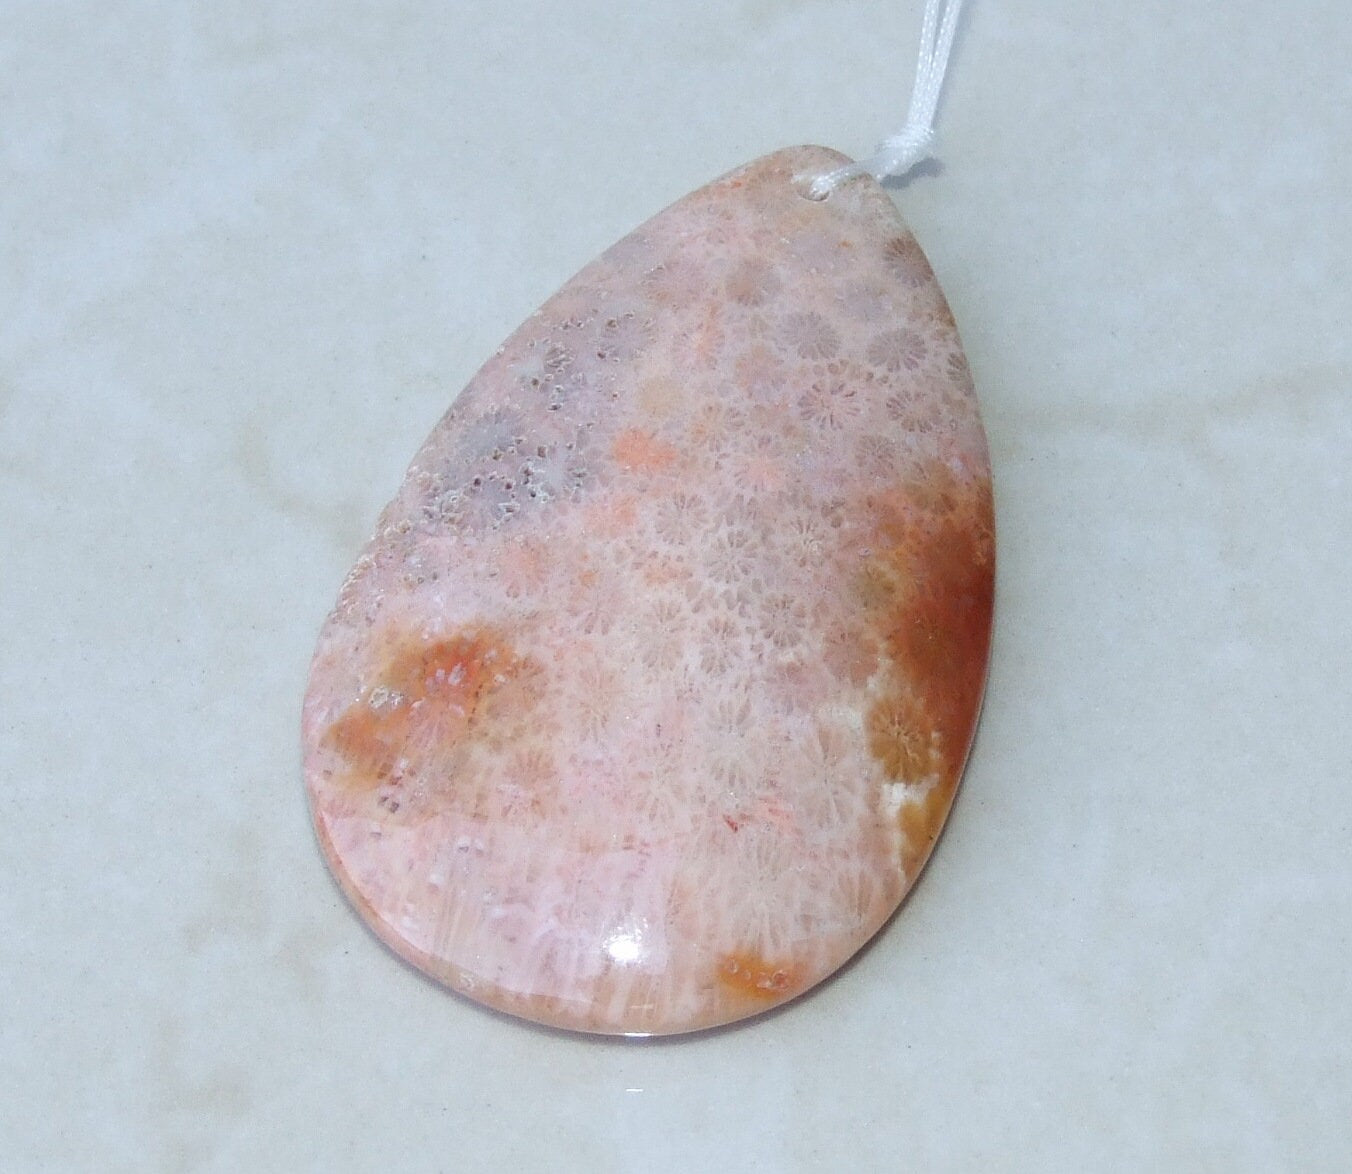 Fossil Coral Agate Pendant, Natural Stone Pendant, Druzy Pendant, Gemstone Pendant, Jewelry Stone, Necklace Pendant, 40mm x 64mm - 9496